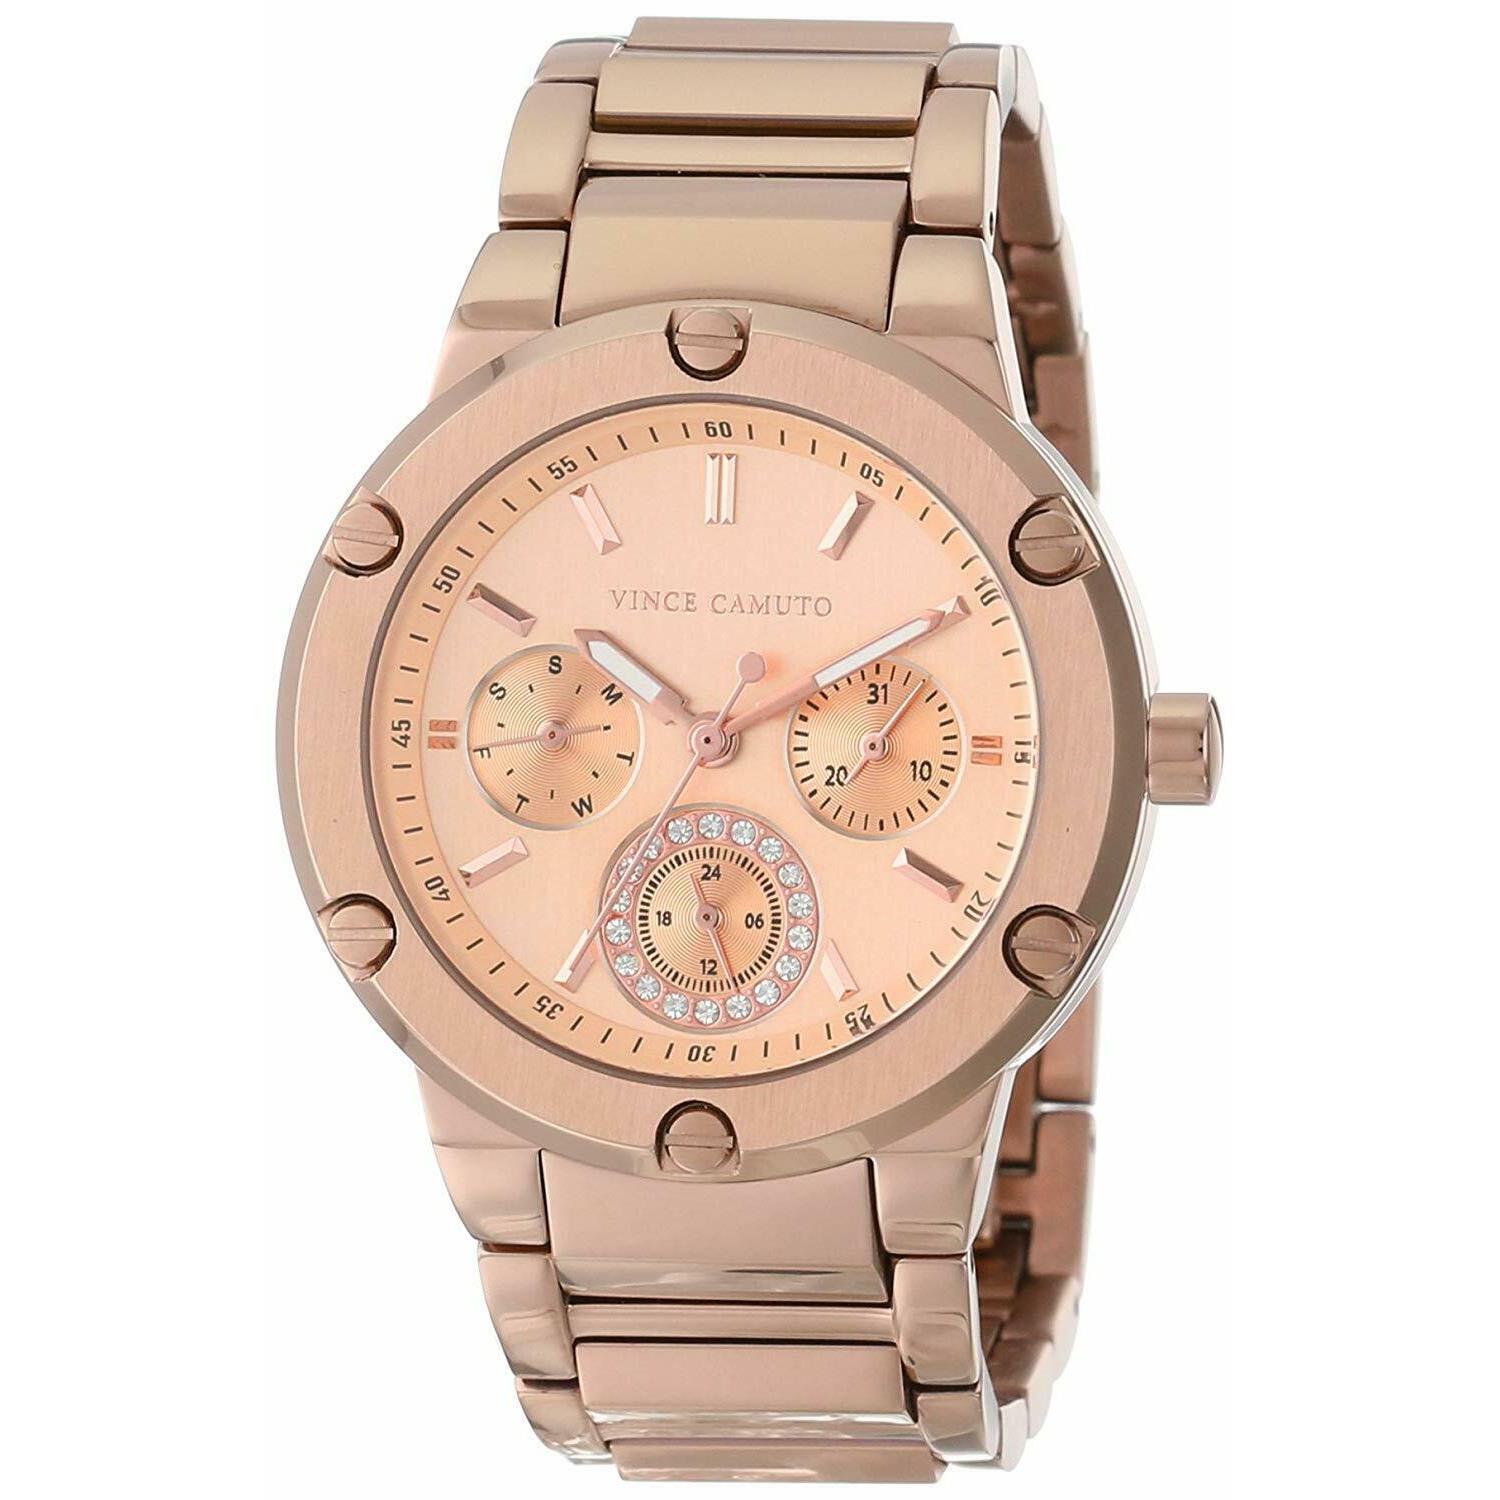 Vince Camuto 5076RGRG Rose Gold Stain Steel Chorograph Watch